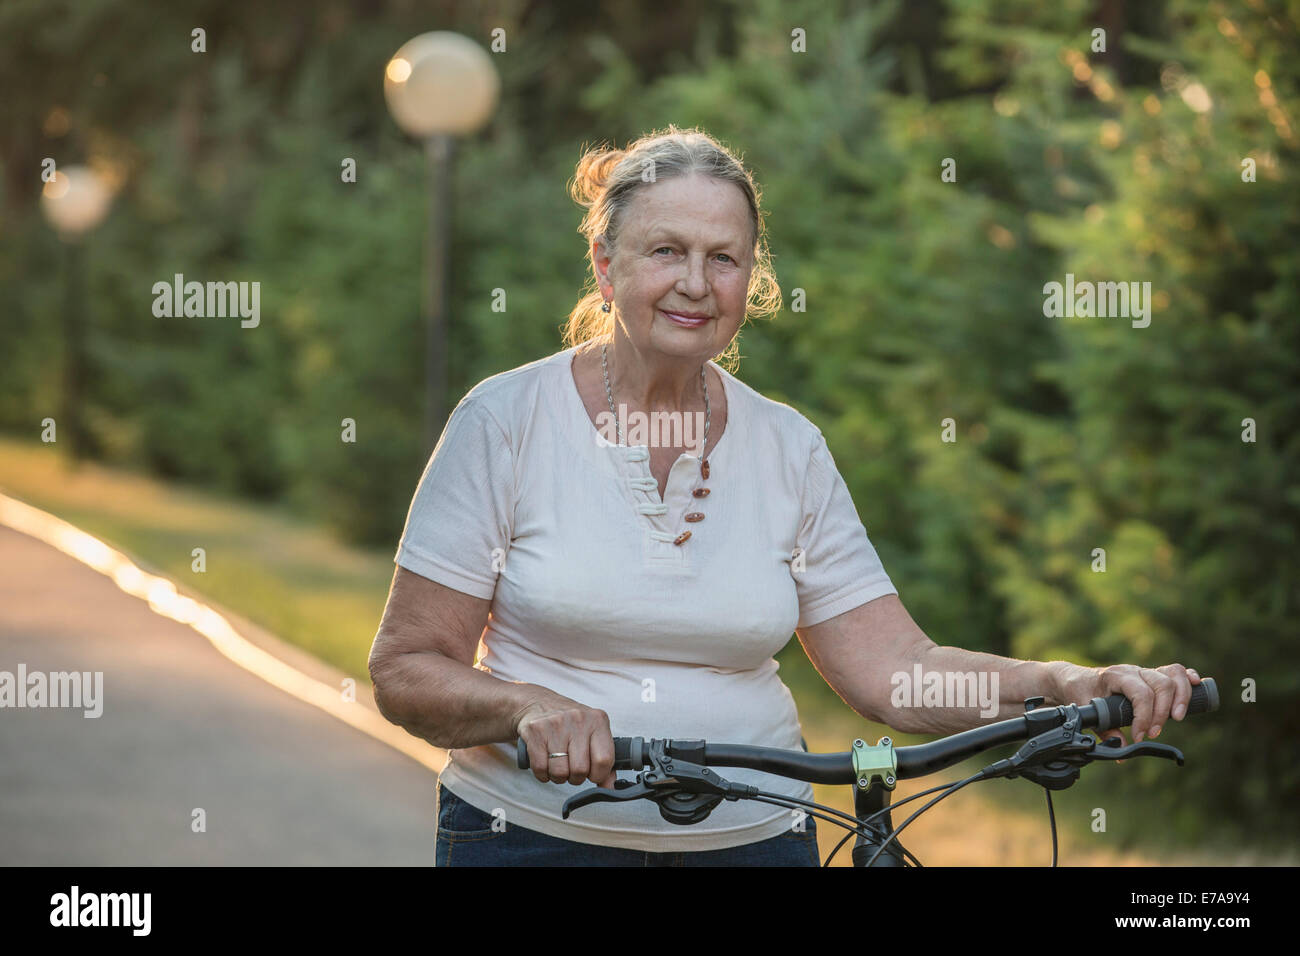 Portrait of senior woman with bicycle in park Banque D'Images